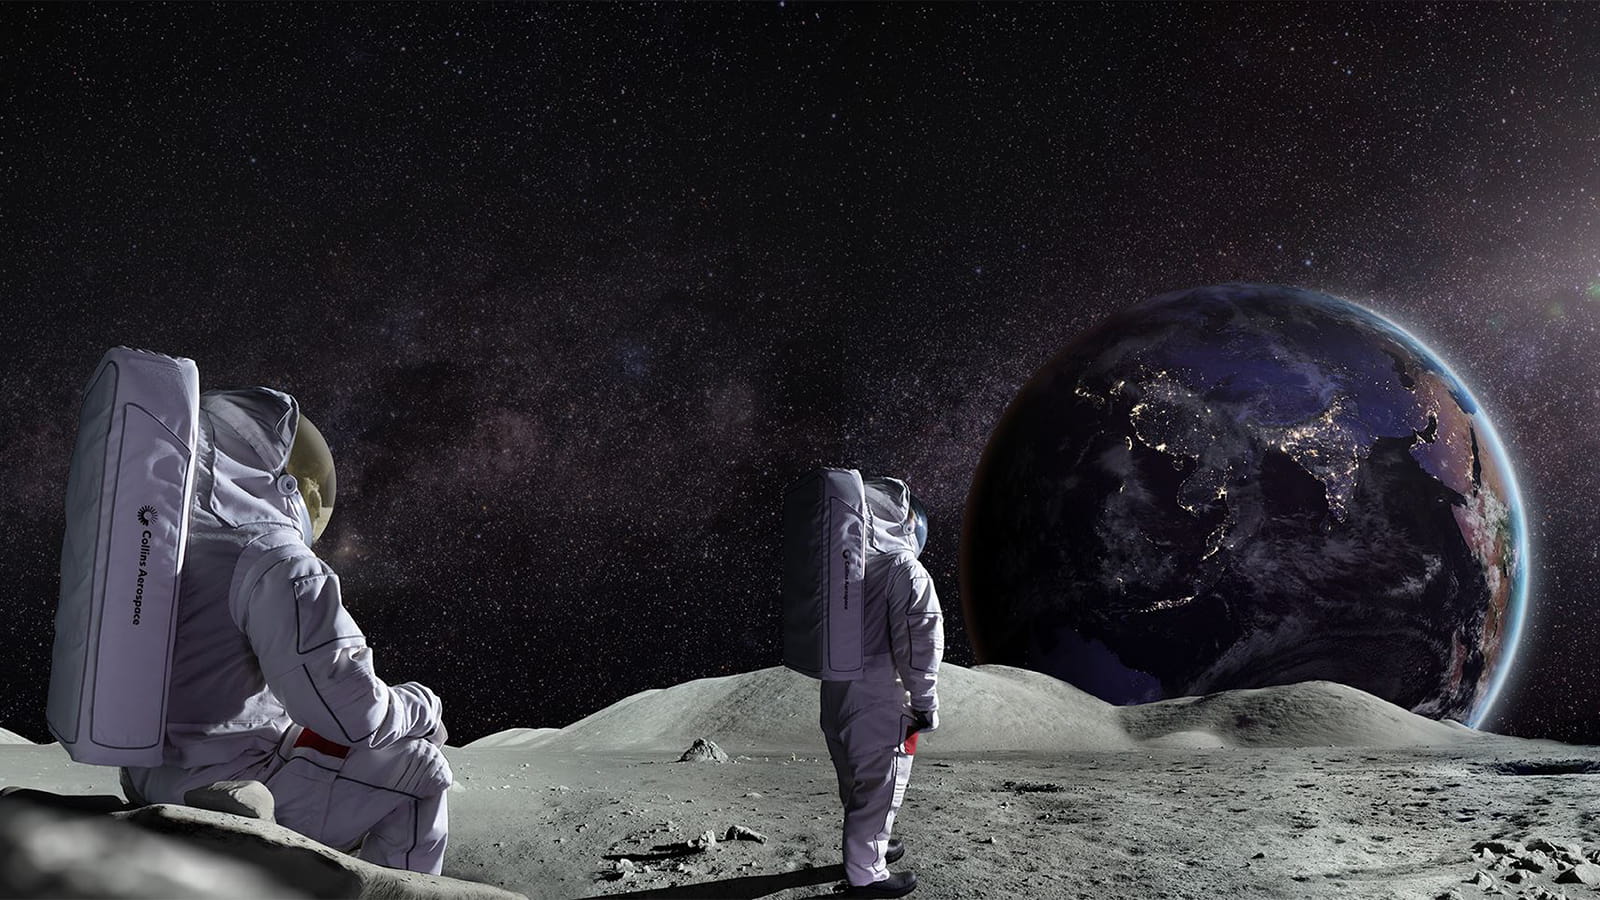 A rendering of two astronauts standing on the moon looking at Earth